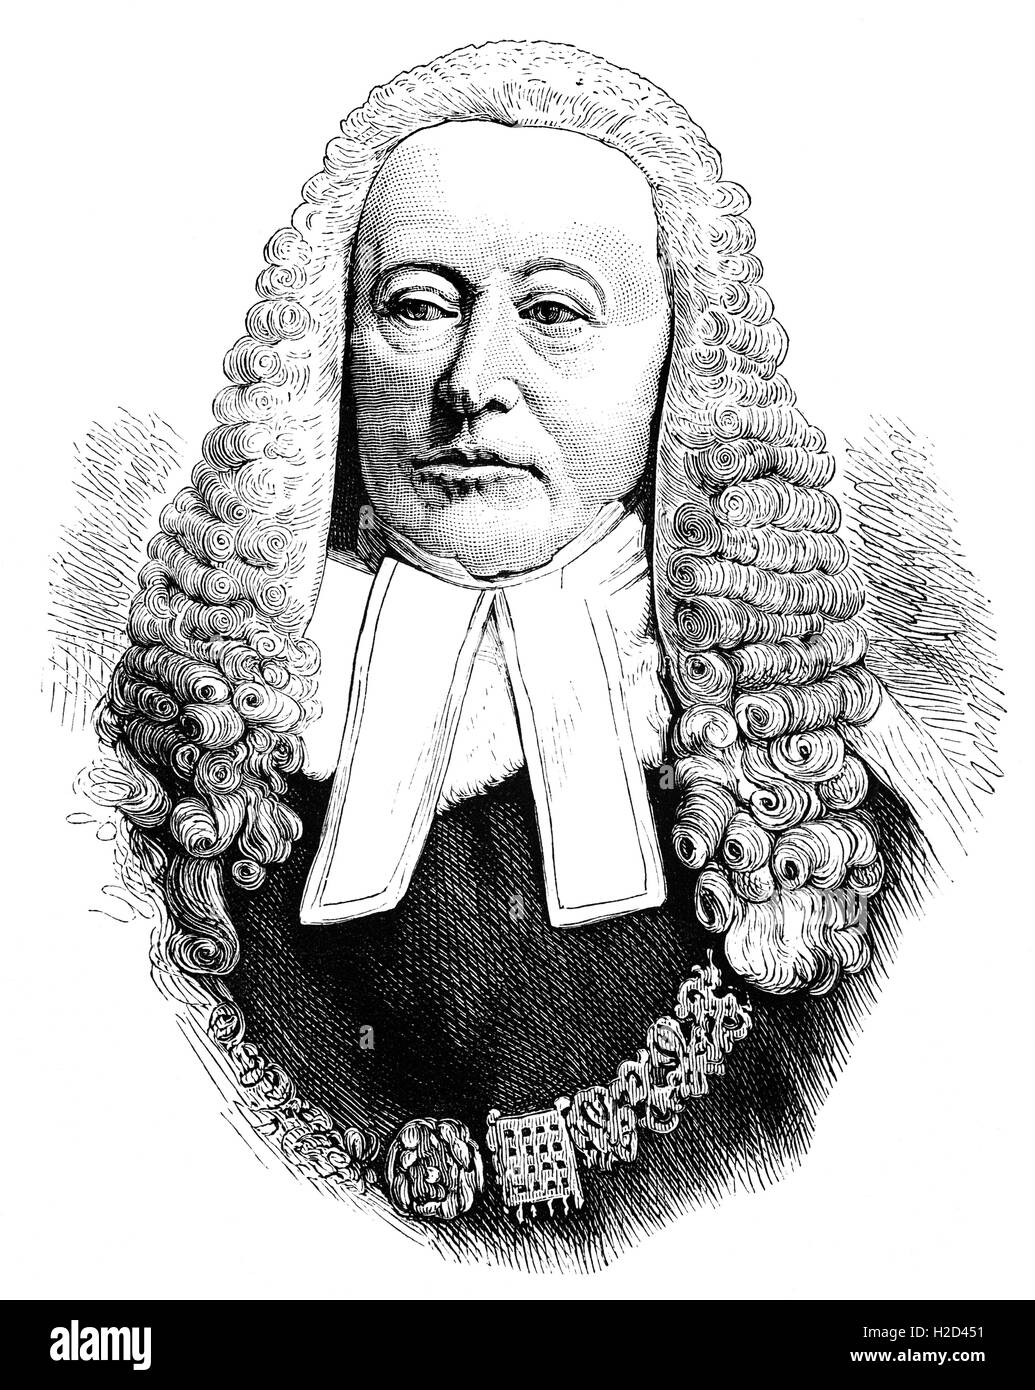 Sir Alexander James Edmund Cockburn (1802 – 1880) was a Scottish jurist and politician who served as the Lord Chief Justice for 21 years. A notorious womaniser and socialite, he heard some of the leading causes célèbres of the nineteenth century. Stock Photo